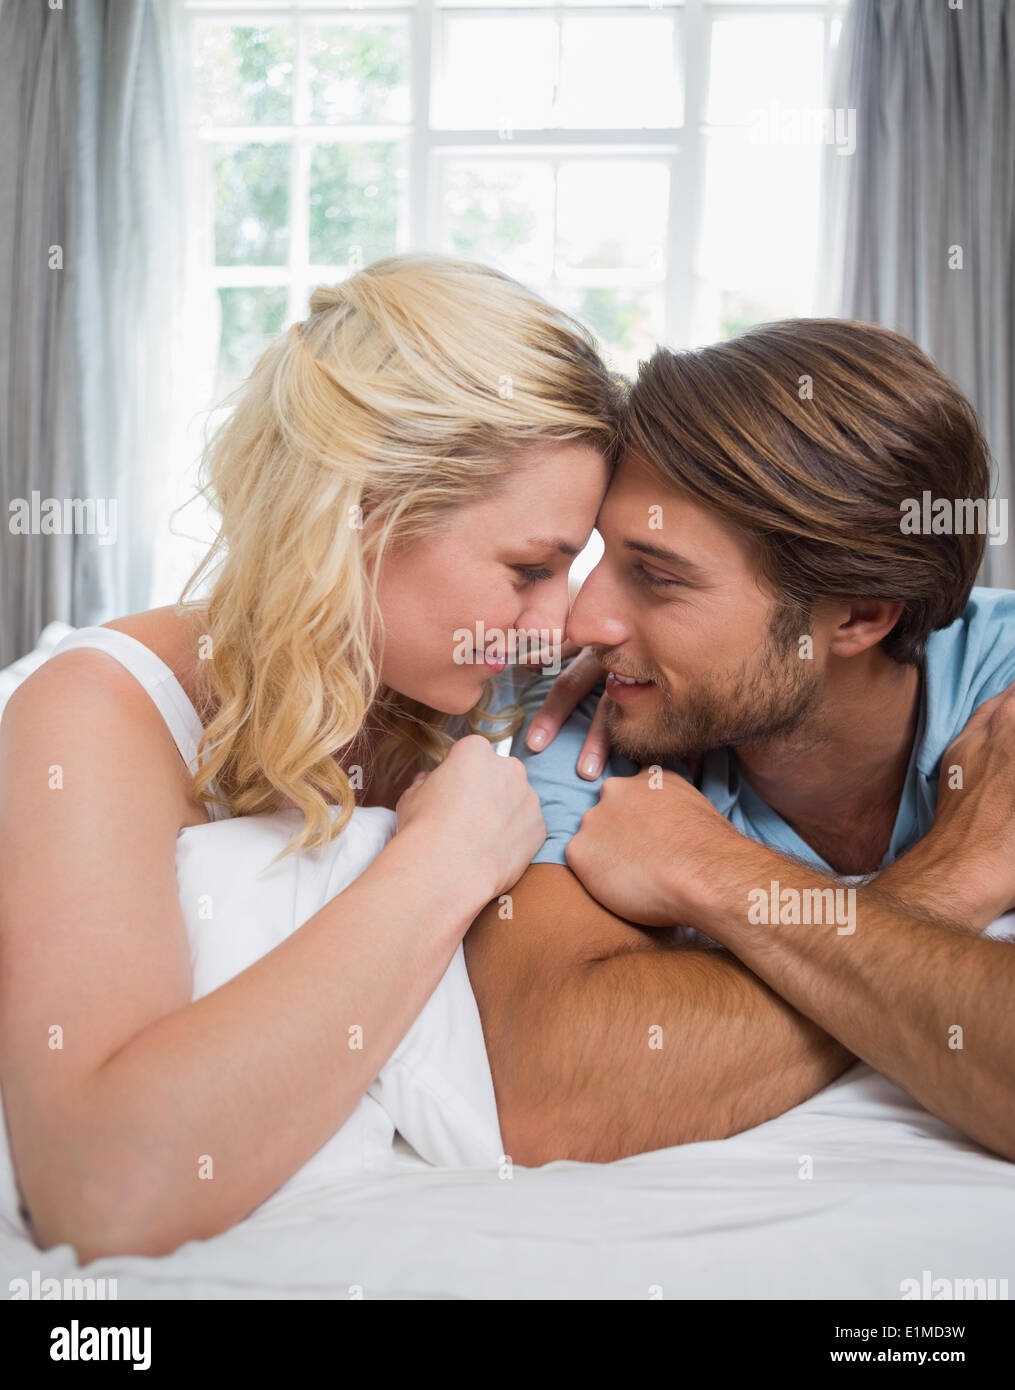 Cute couple relaxing on bed smiling at each other Stock Photo